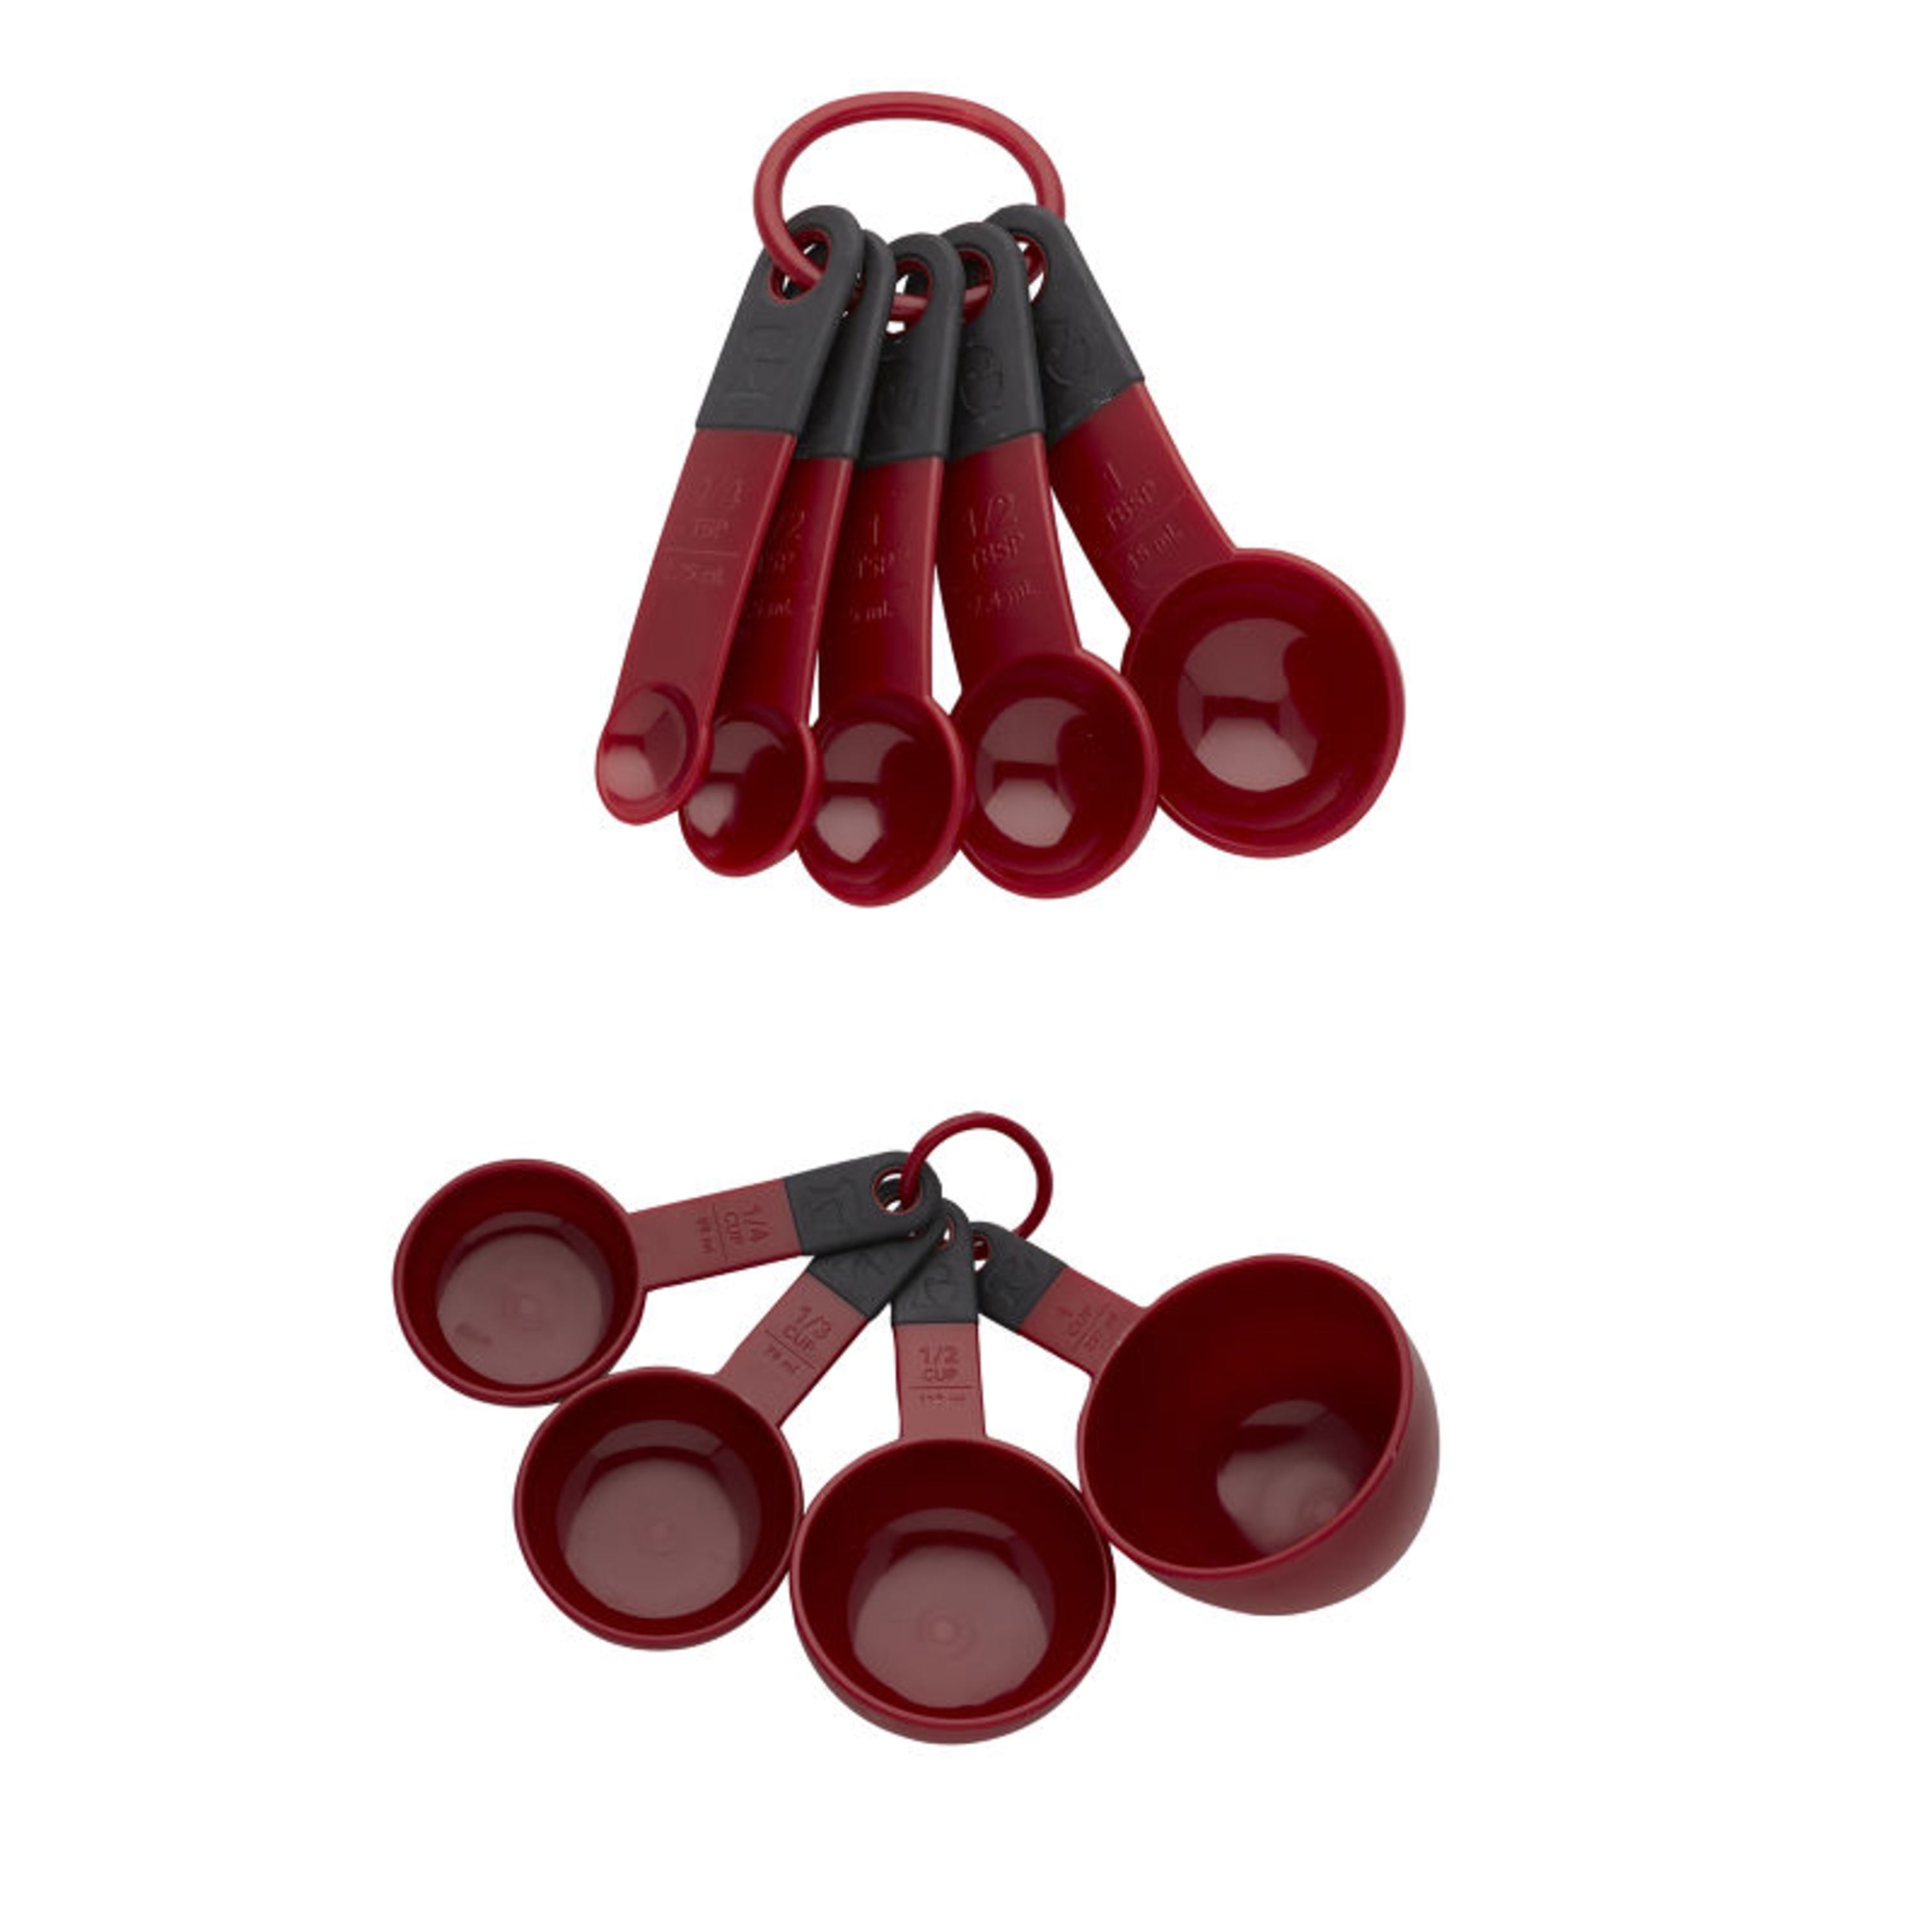 KitchenAid Plastic Measuring Spoons Set of 5 Red KC057OHERA for sale online